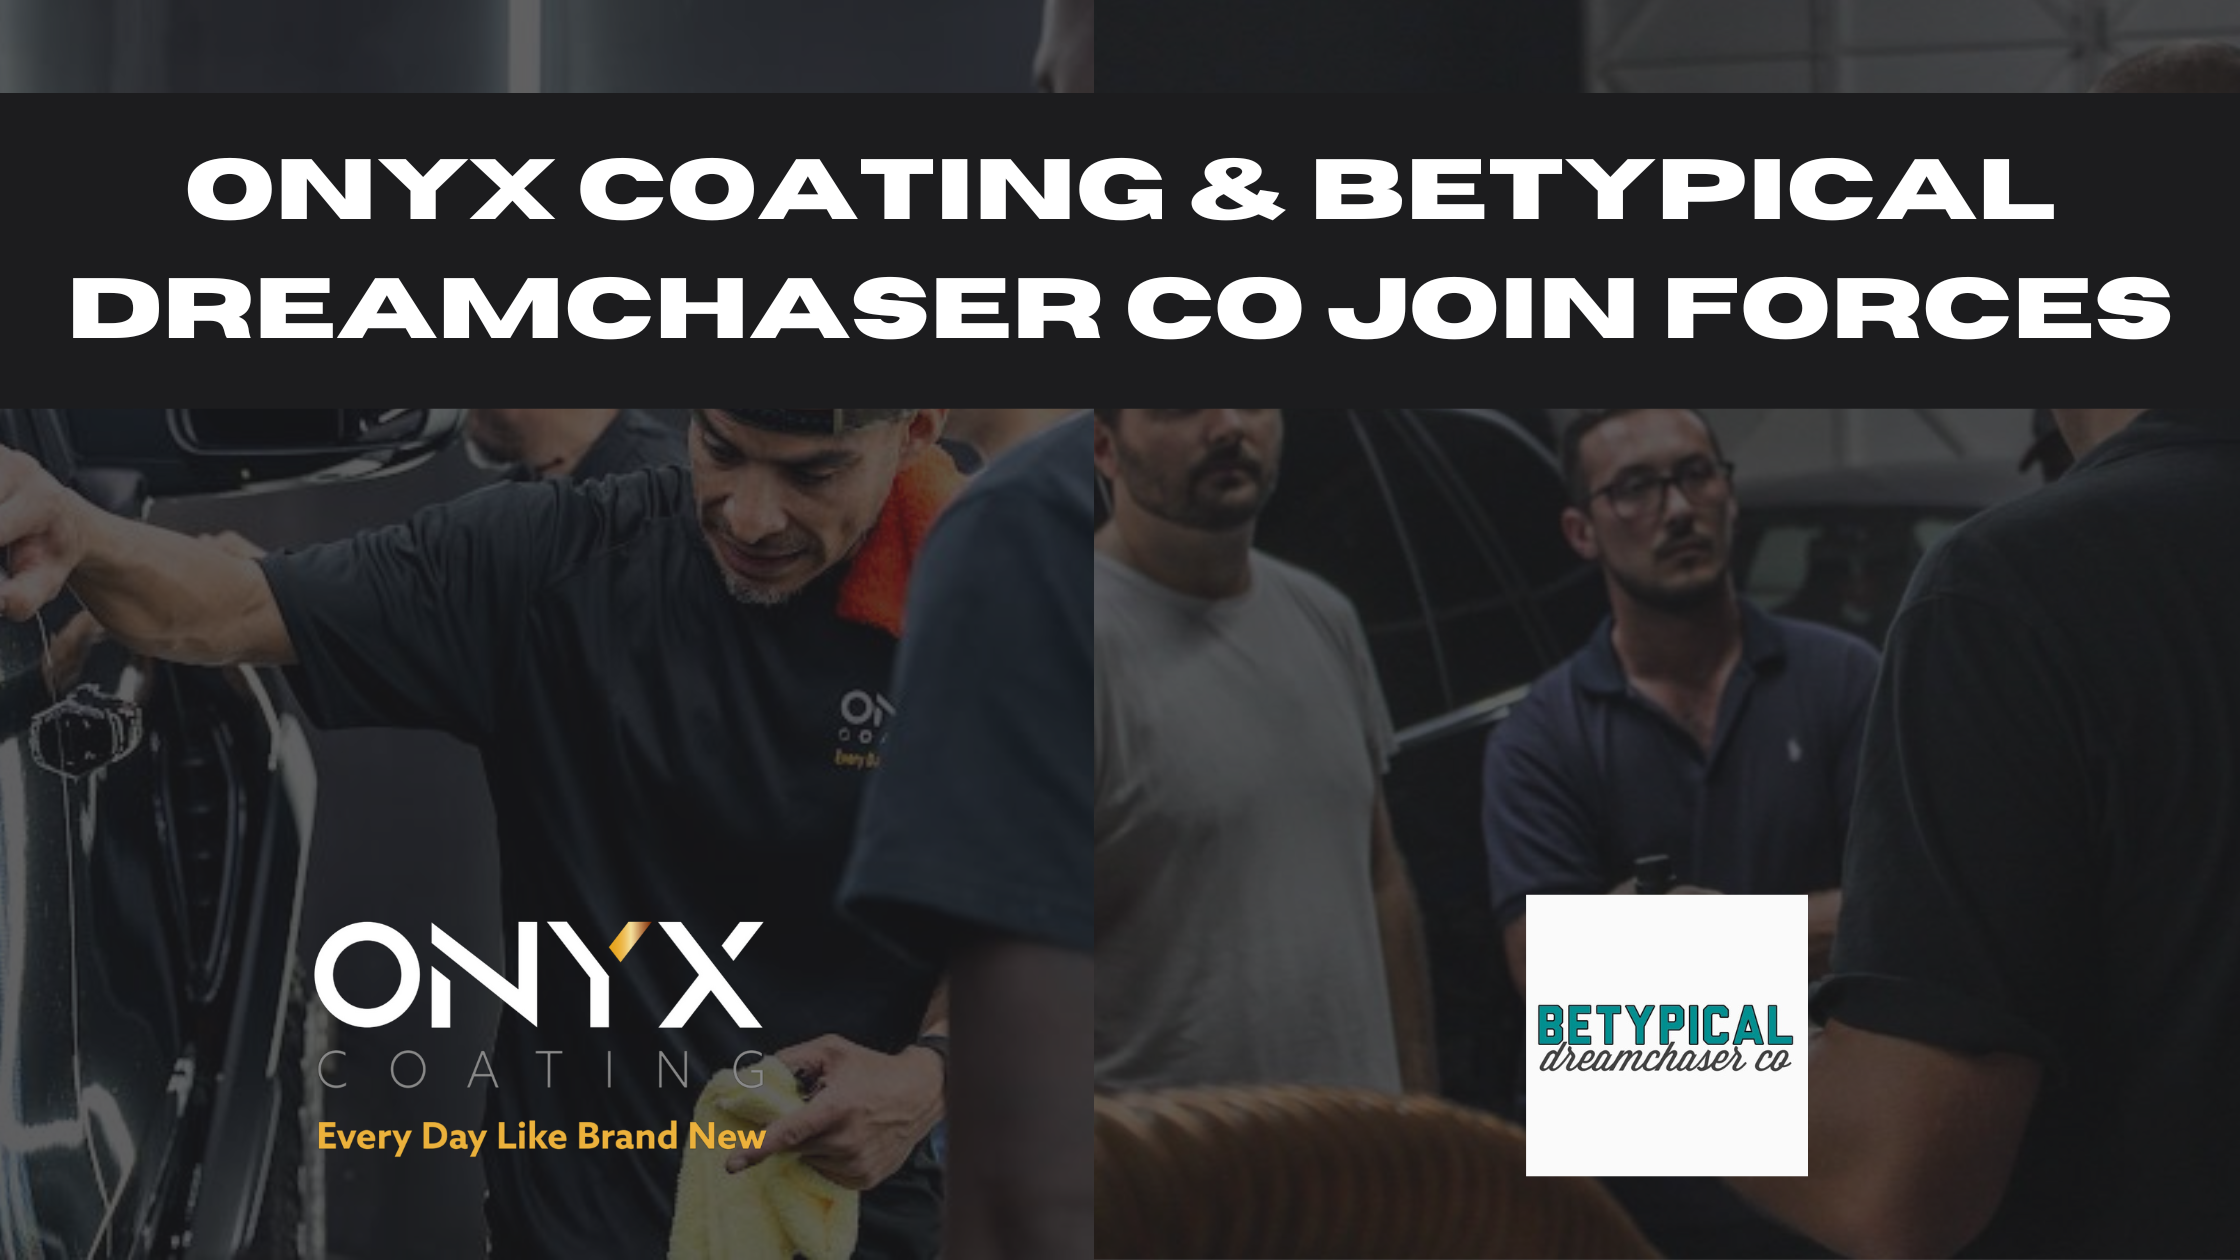 ONYX COATING Expands Reach with New Distribution Partnership in the Netherlands